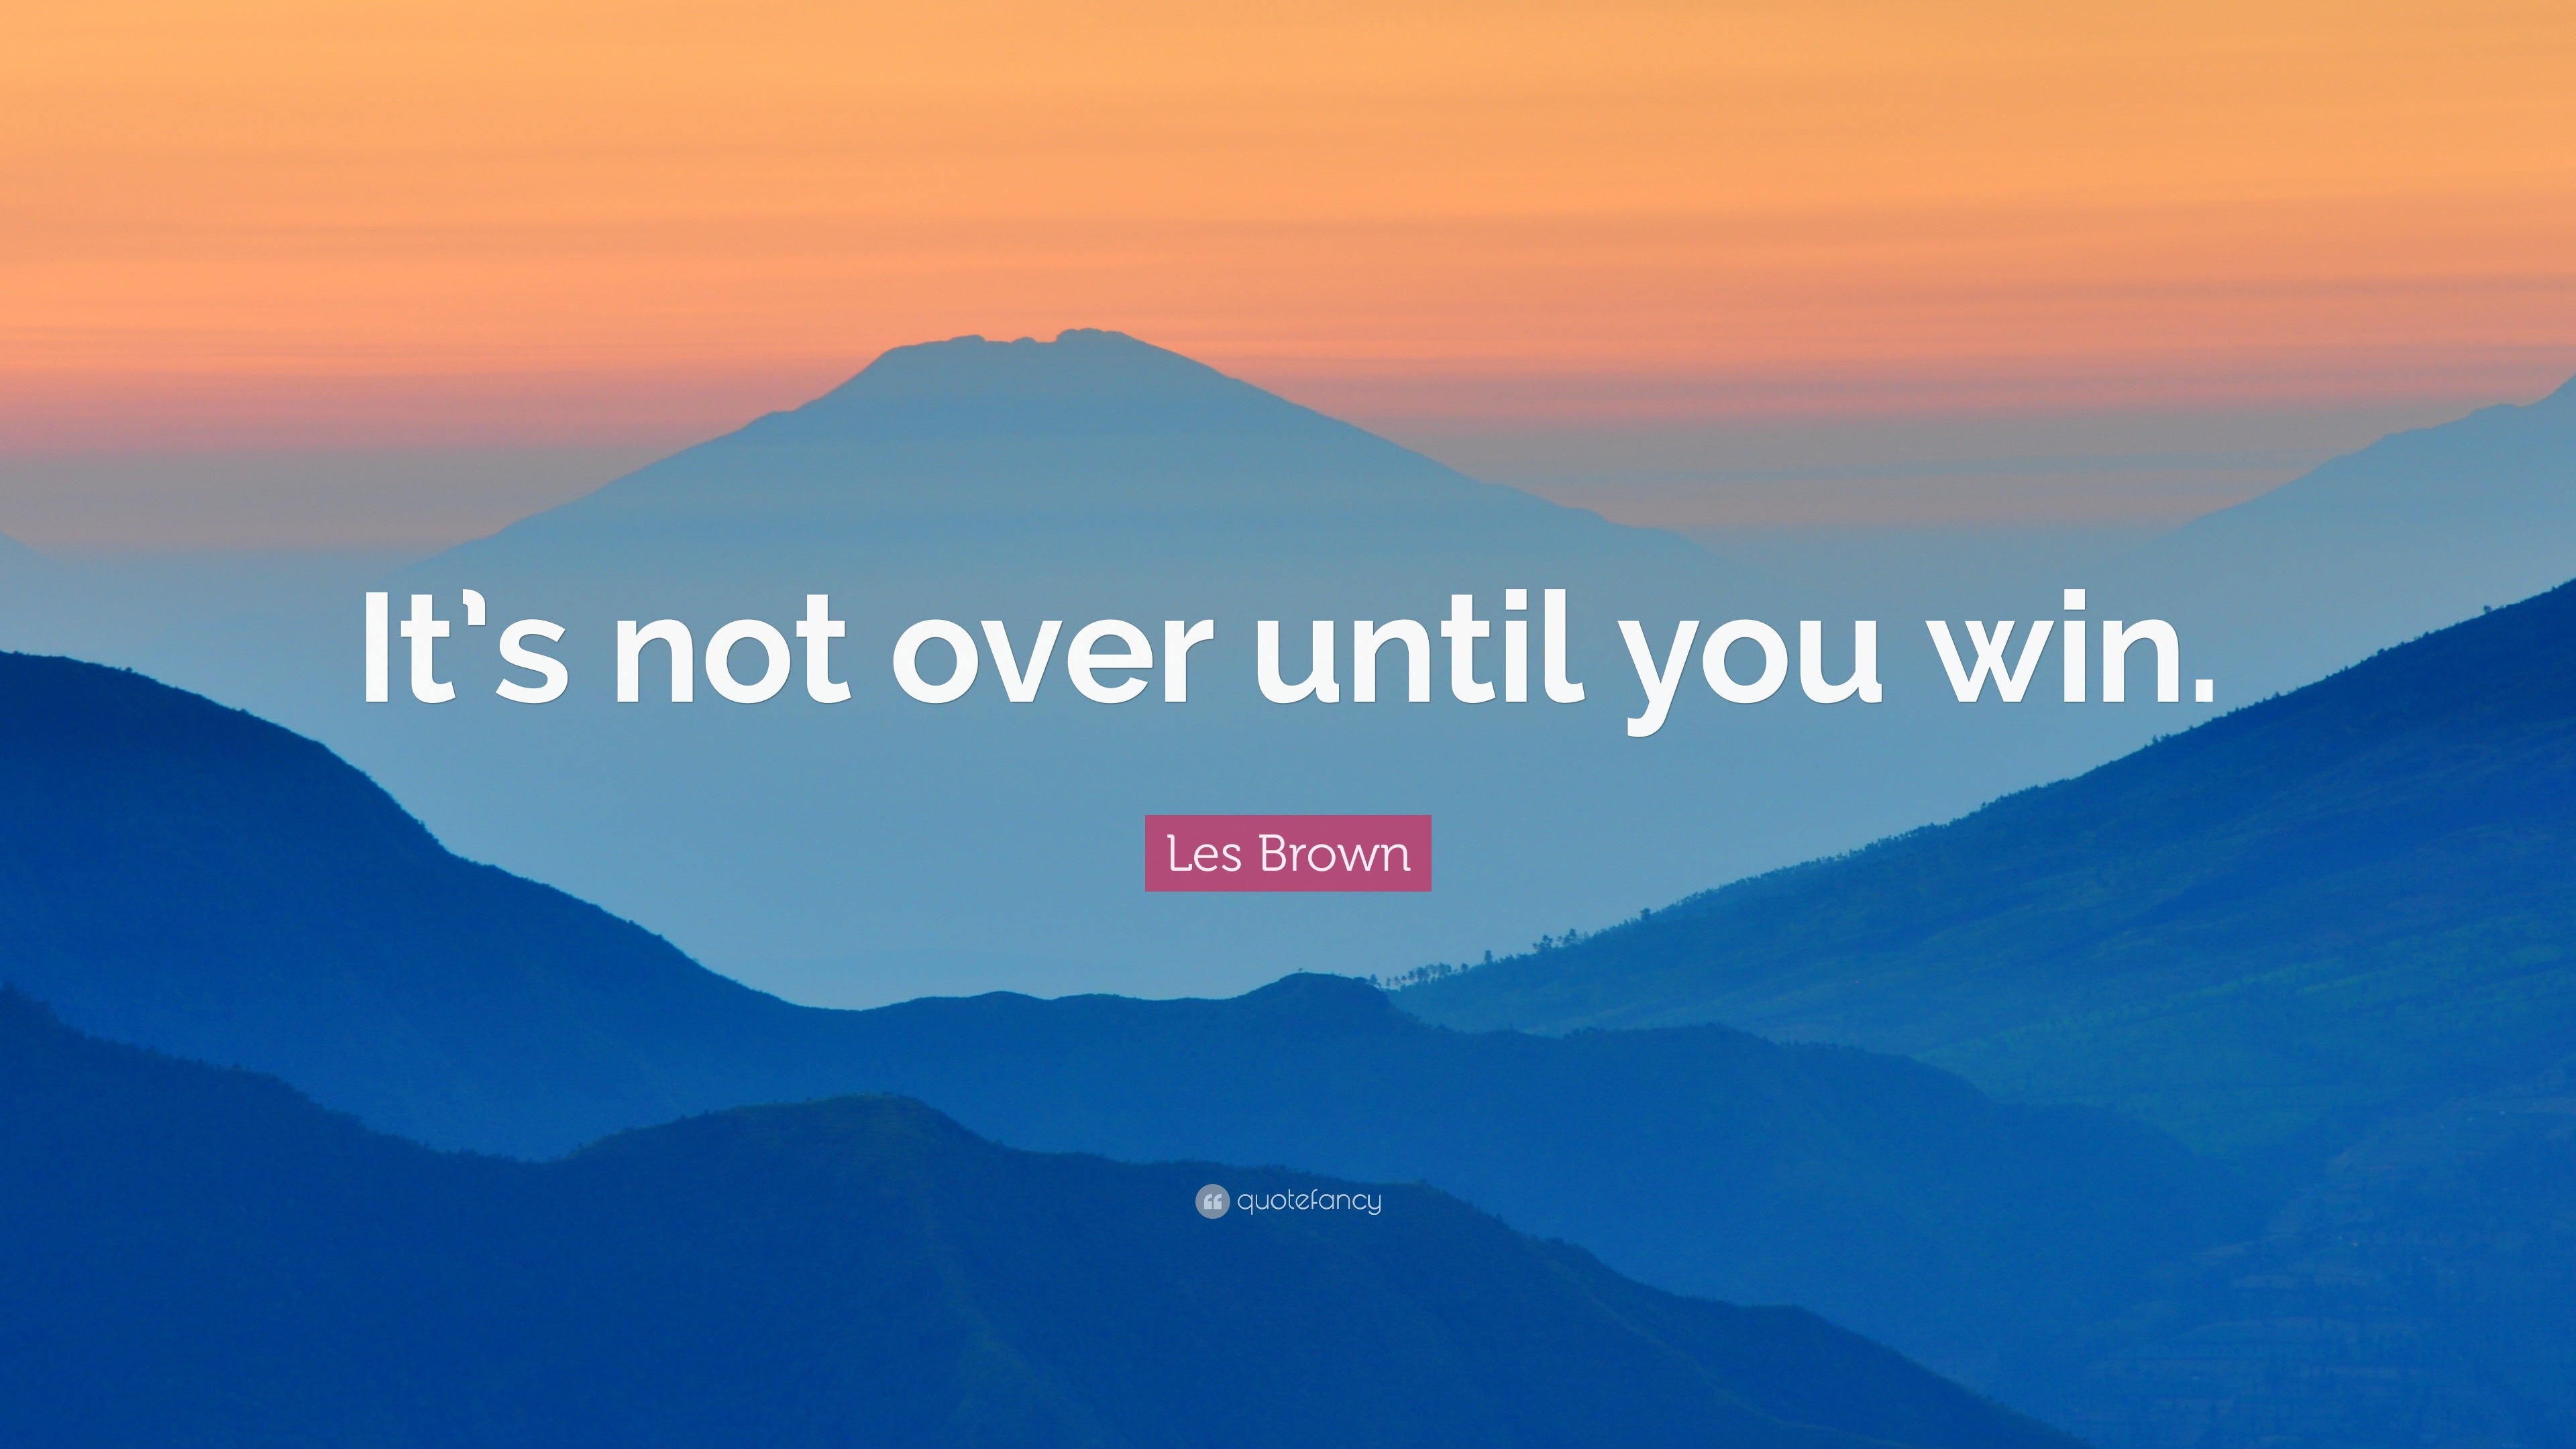 Les Brown Quote “It’s not over until you win.” (31